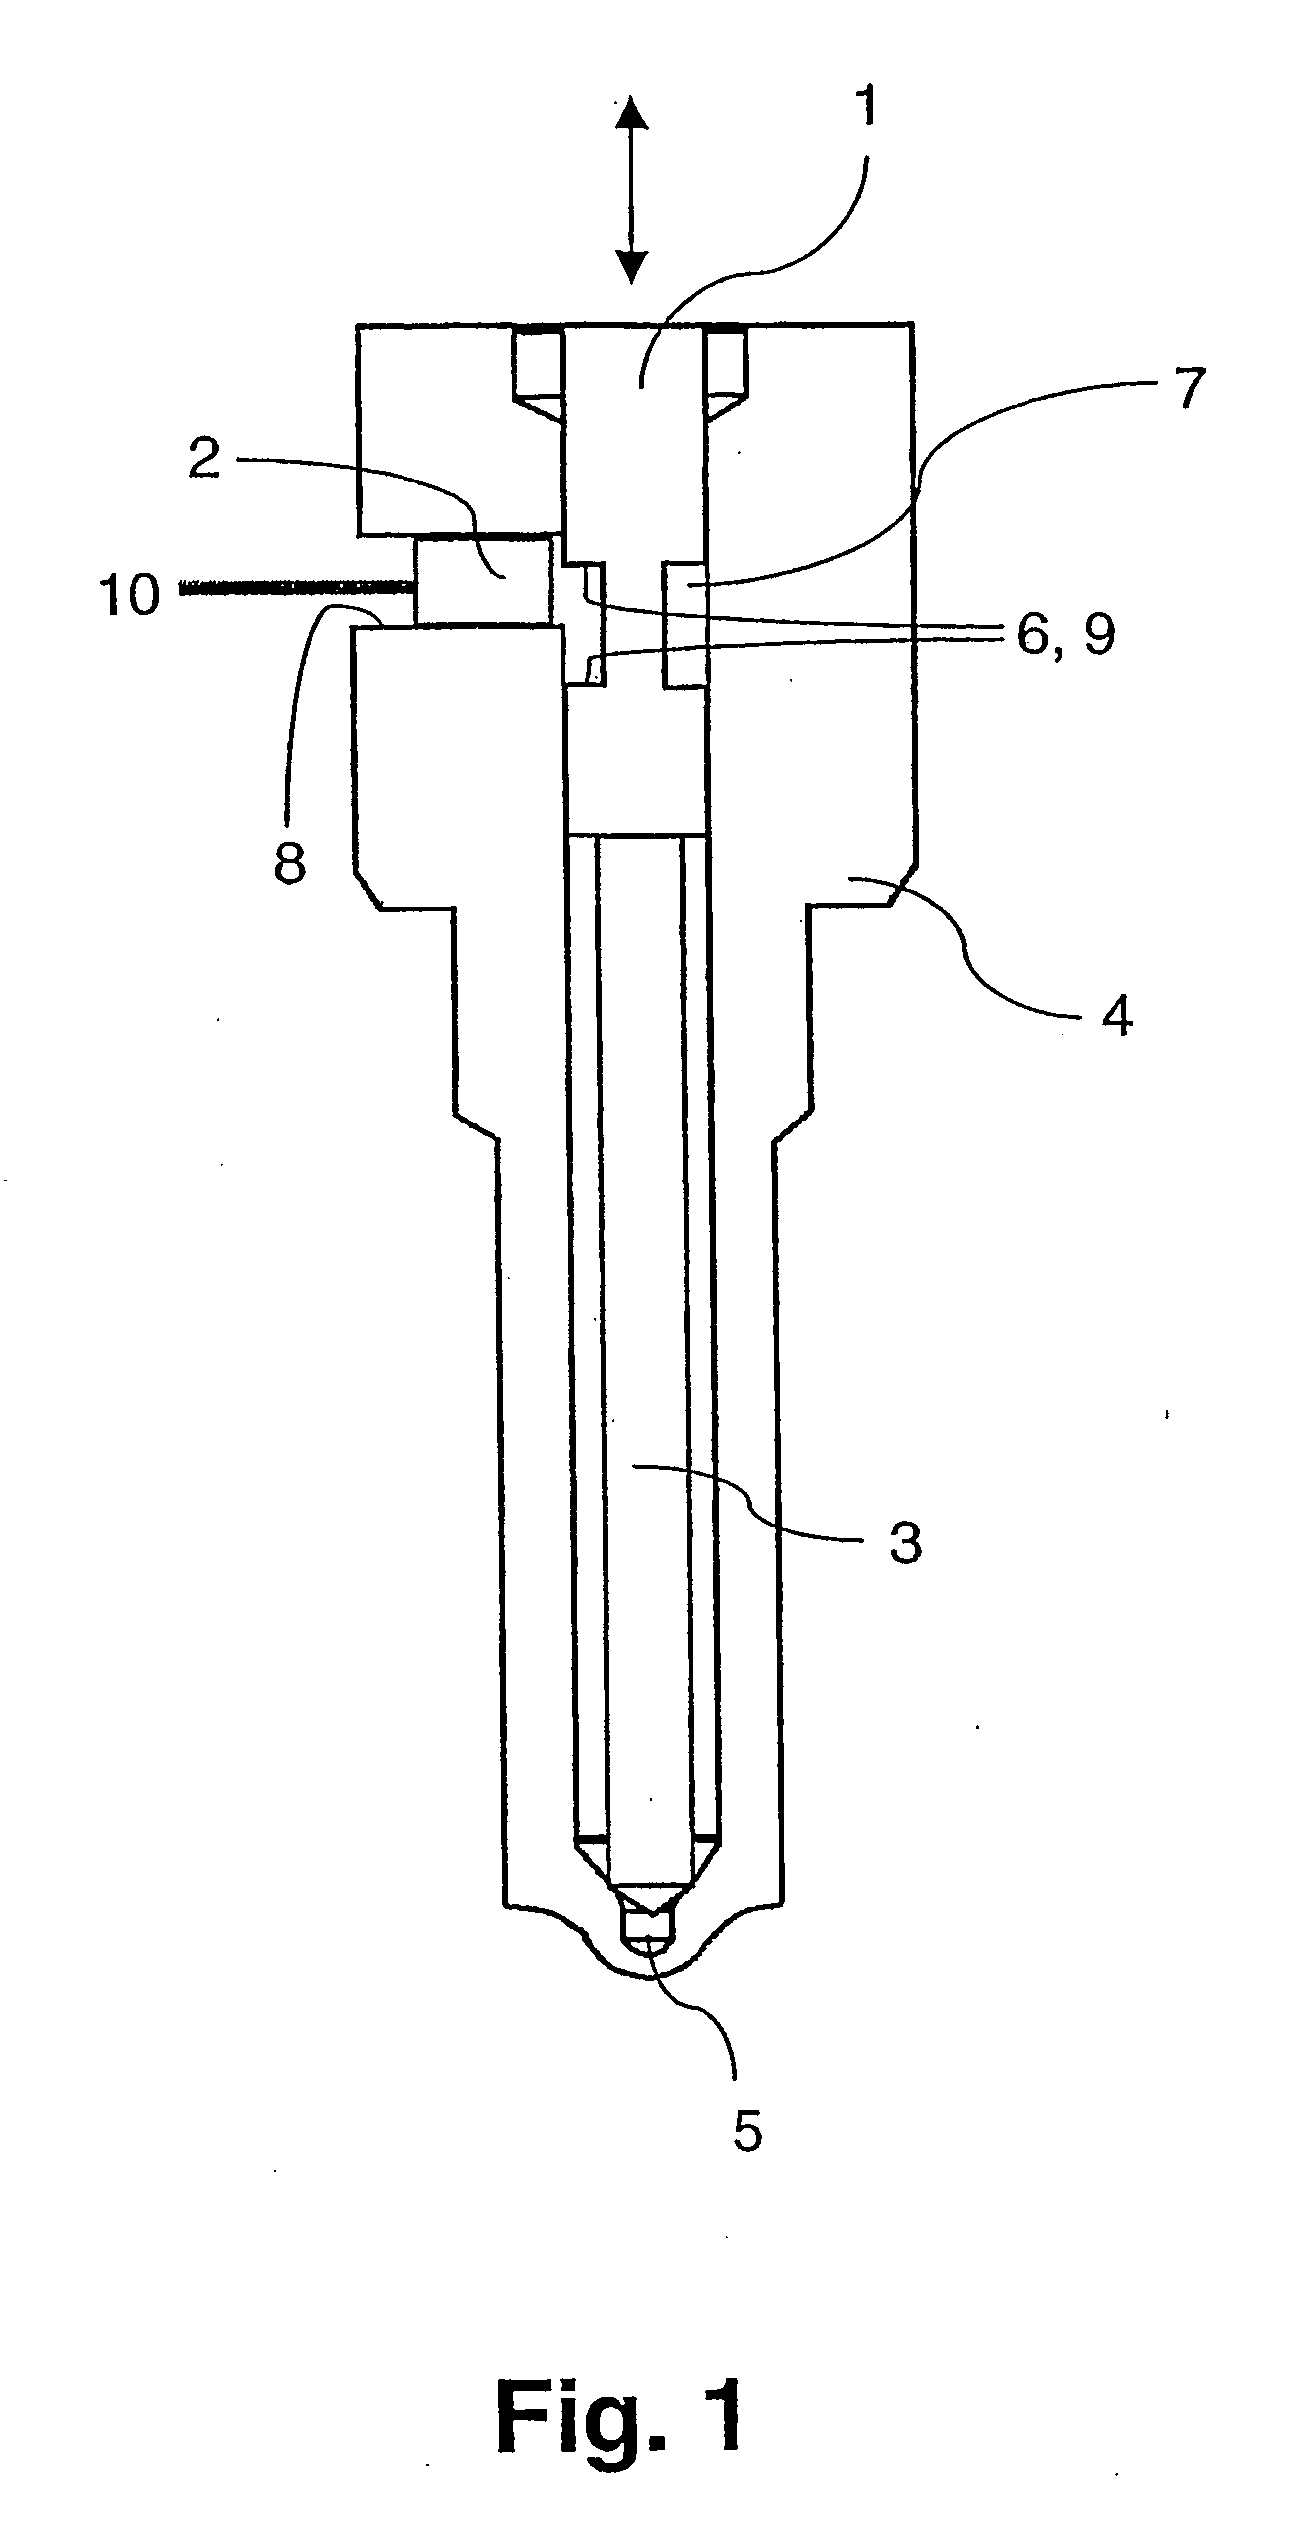 Measuring device and method for determining the position of an electrically conductive test object